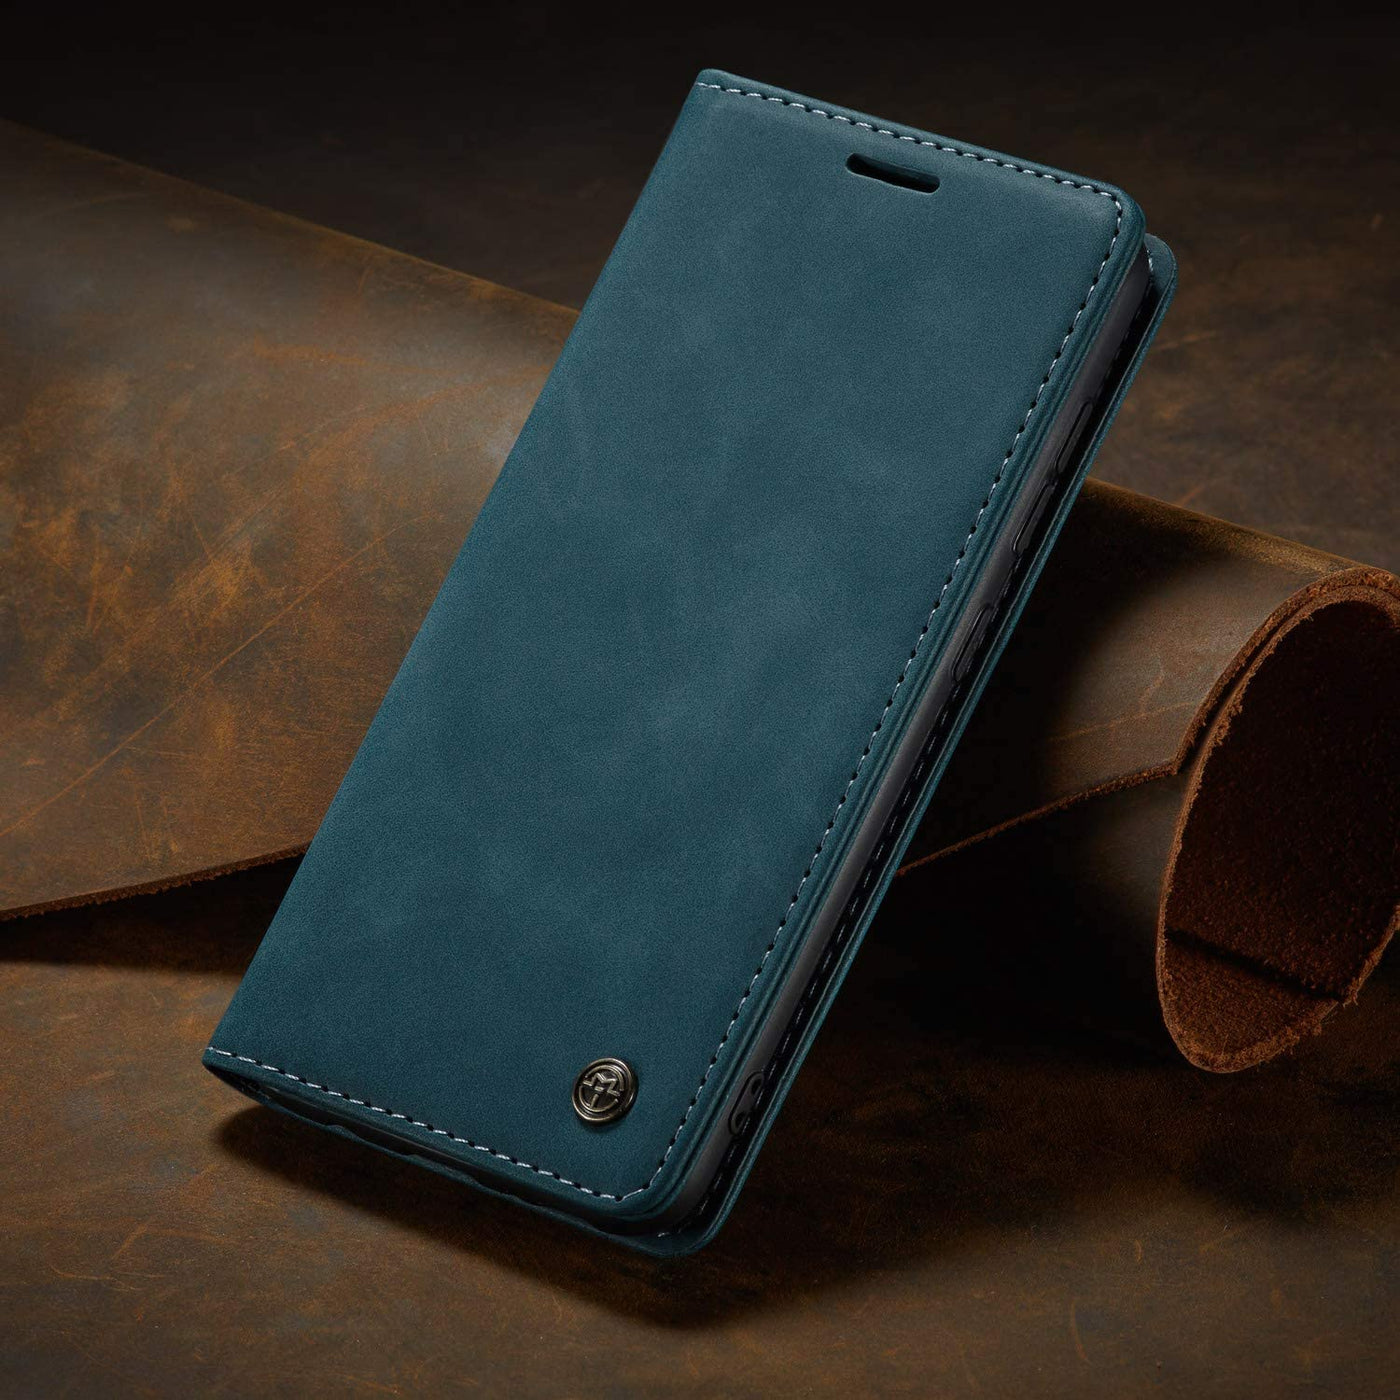 Apple iPhone 12 blue leather wallet flip cover by excelsior